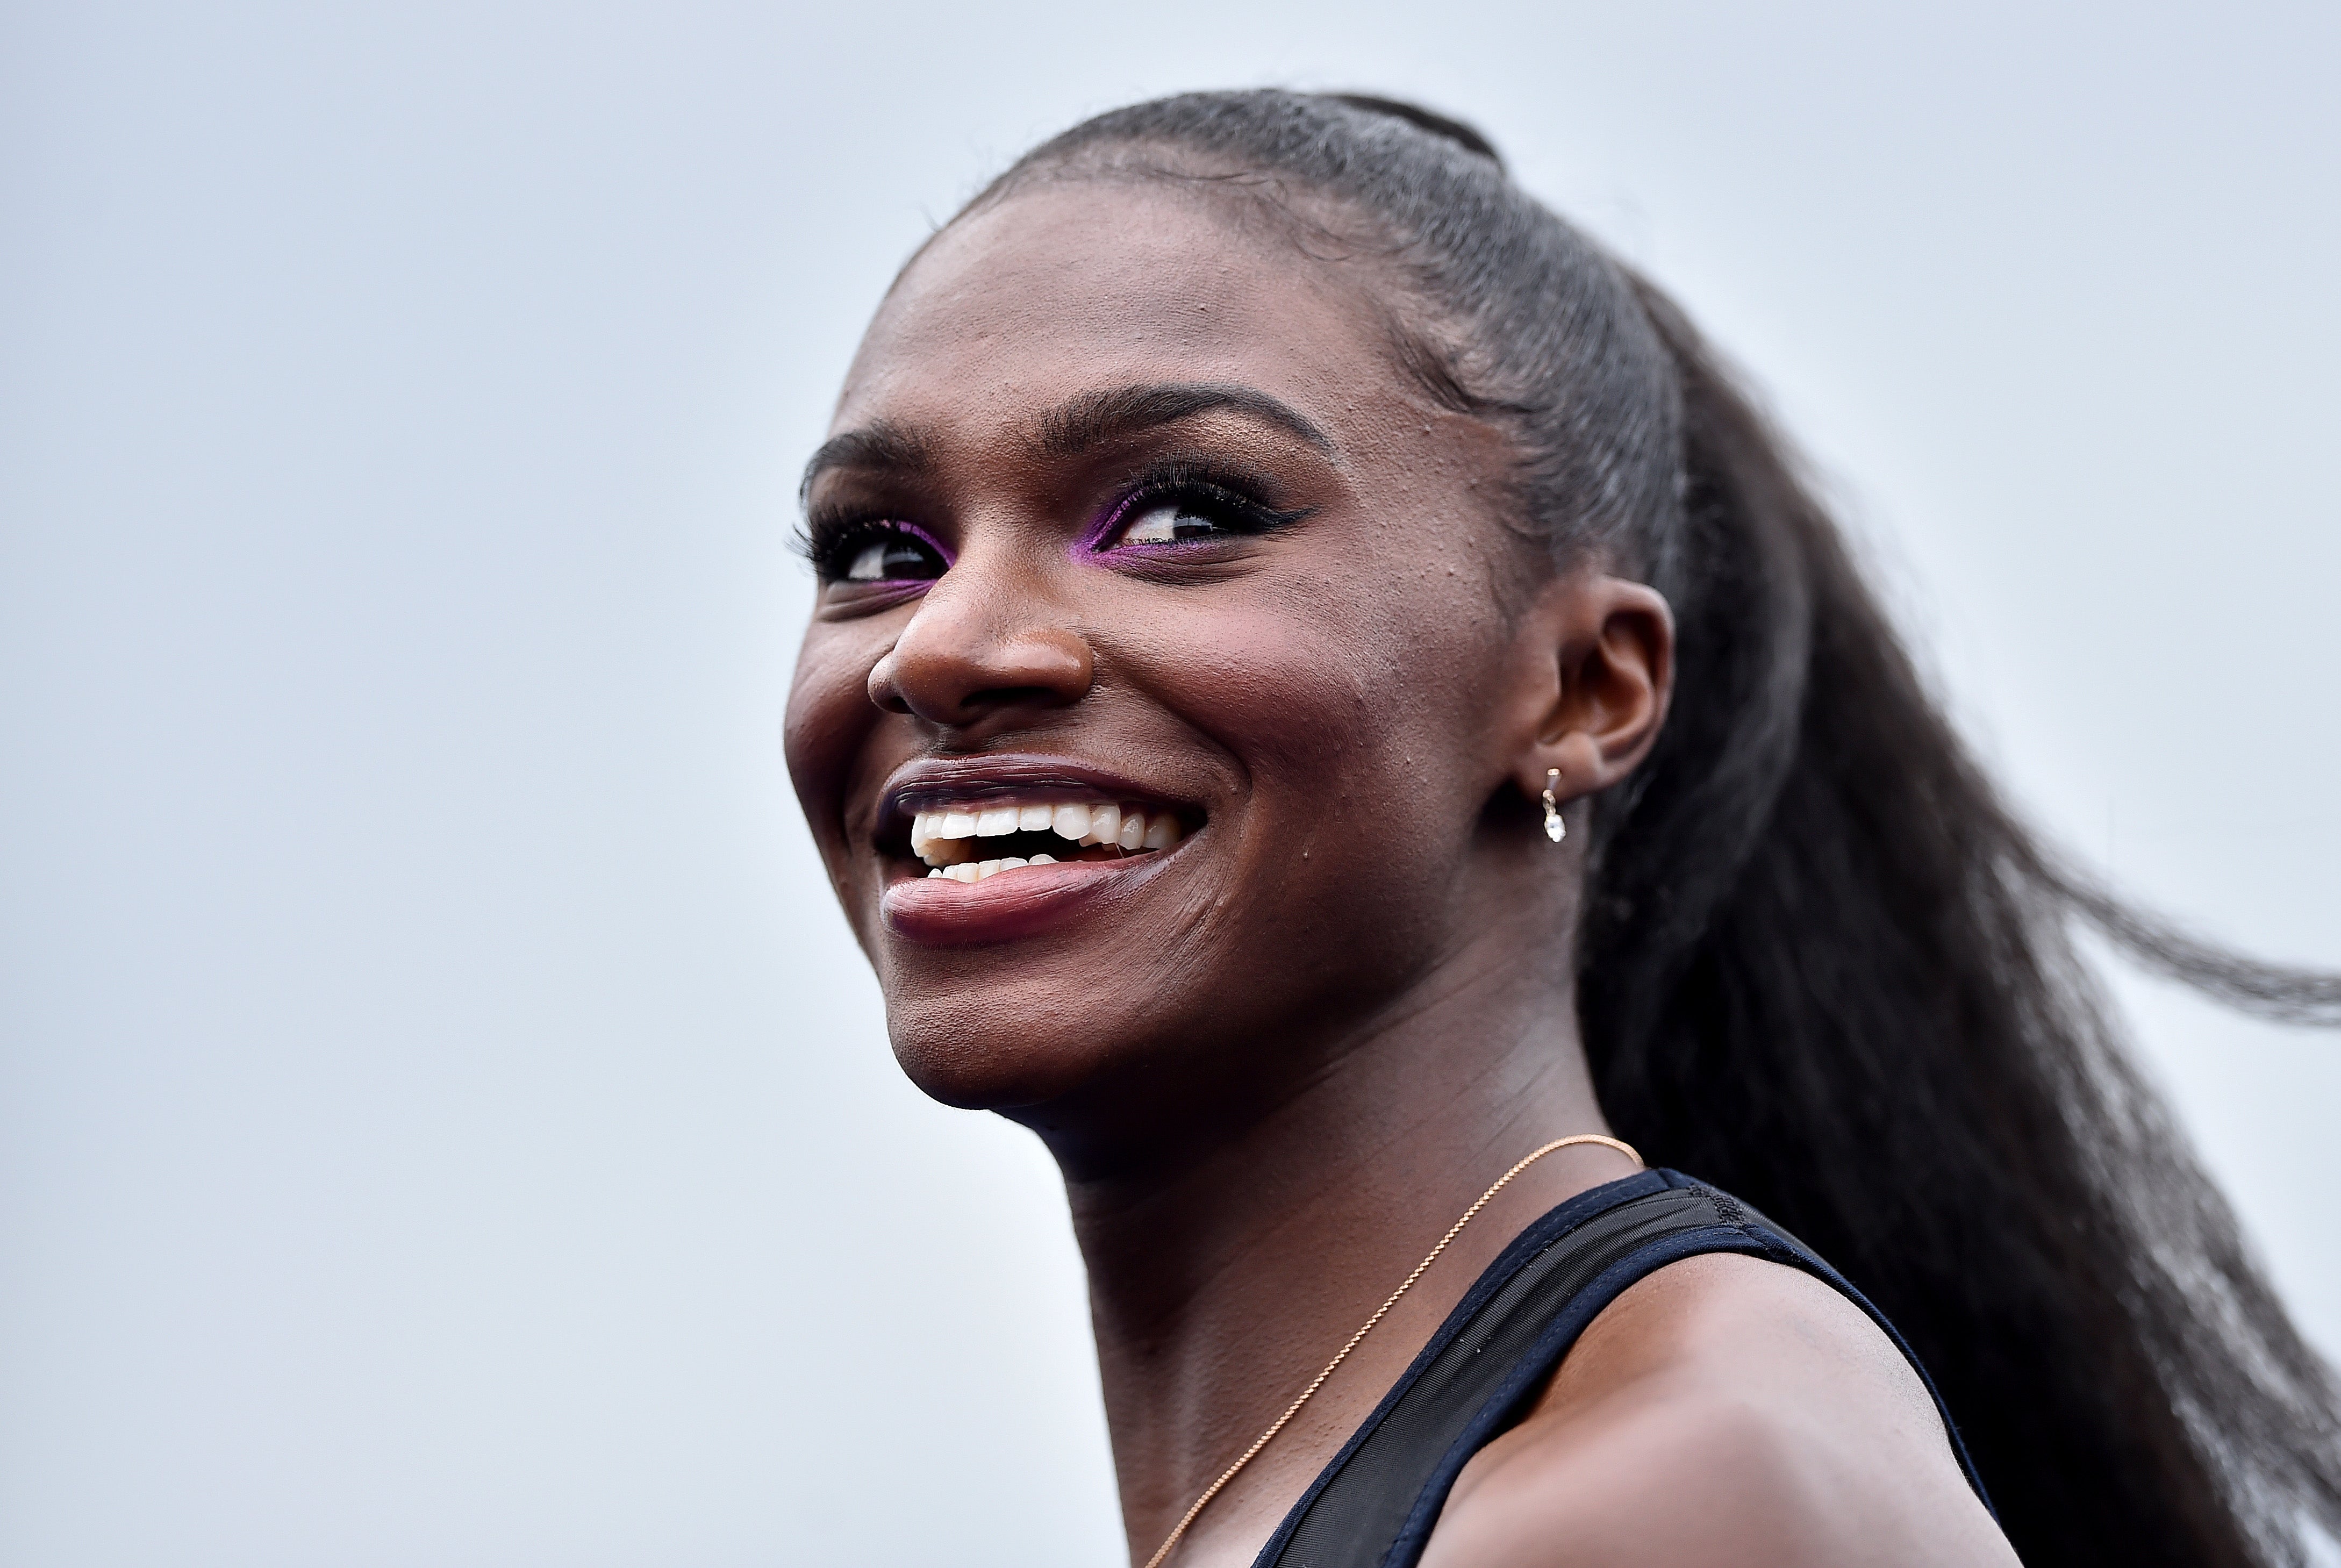 Dina Asher-Smith is the face of Team GB heading to Tokyo